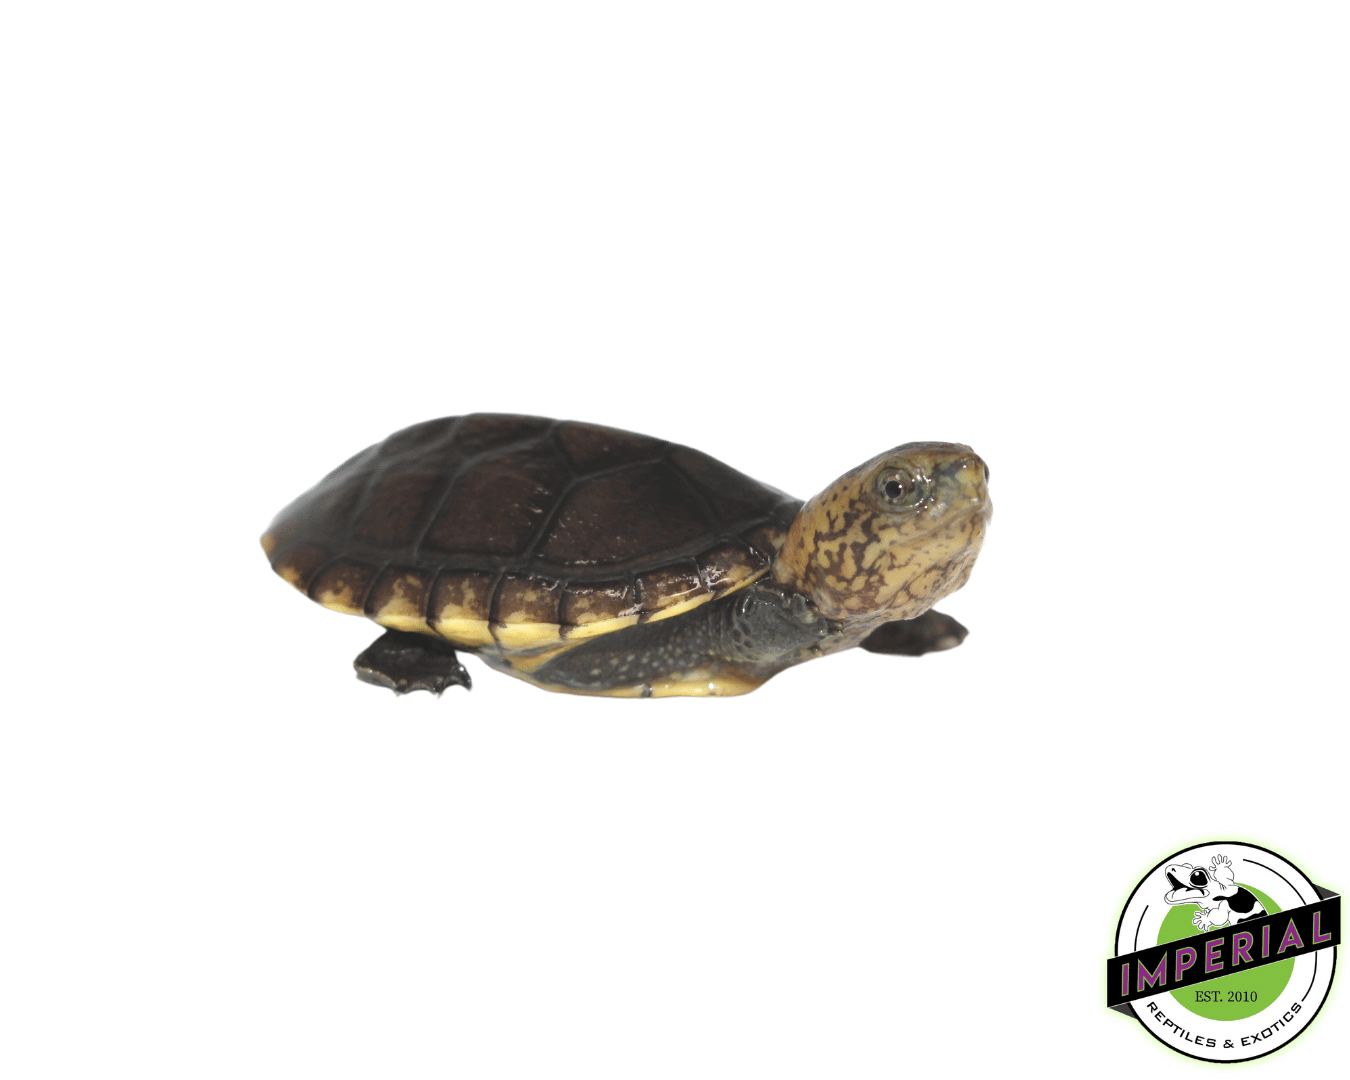 white lip mud turtle for sale, buy reptiles online